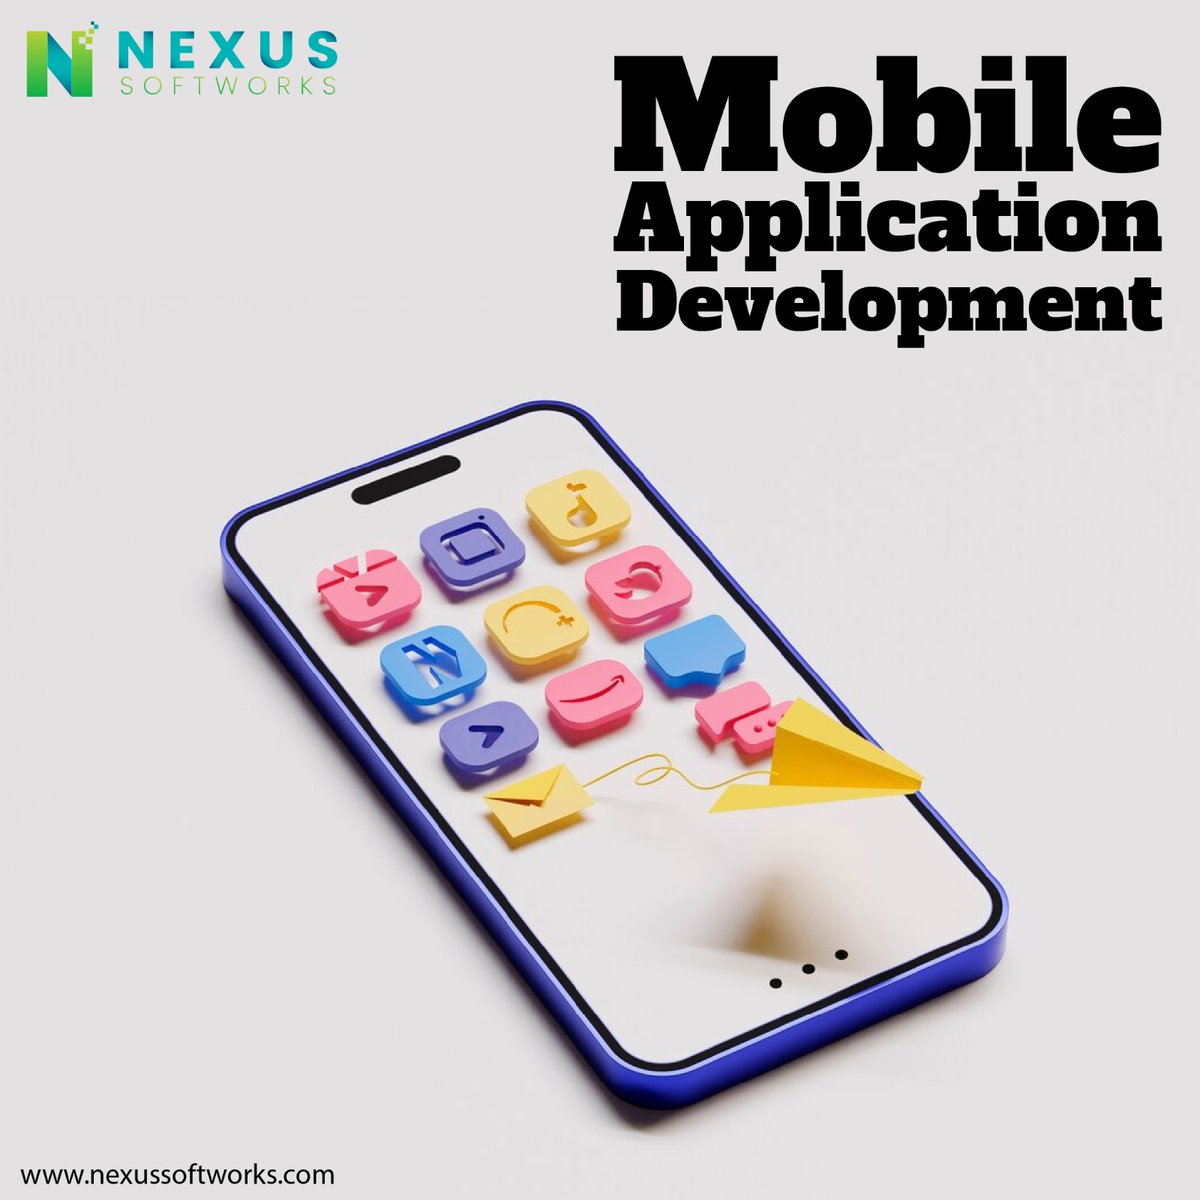 We bridge the gap between imagination and reality. Our mobile app development process takes your vision from the initial spark to a fully functional app in the palms of your users.
.
.
#nexussoftworks #mobileapp #developmentprocess 📱🖥